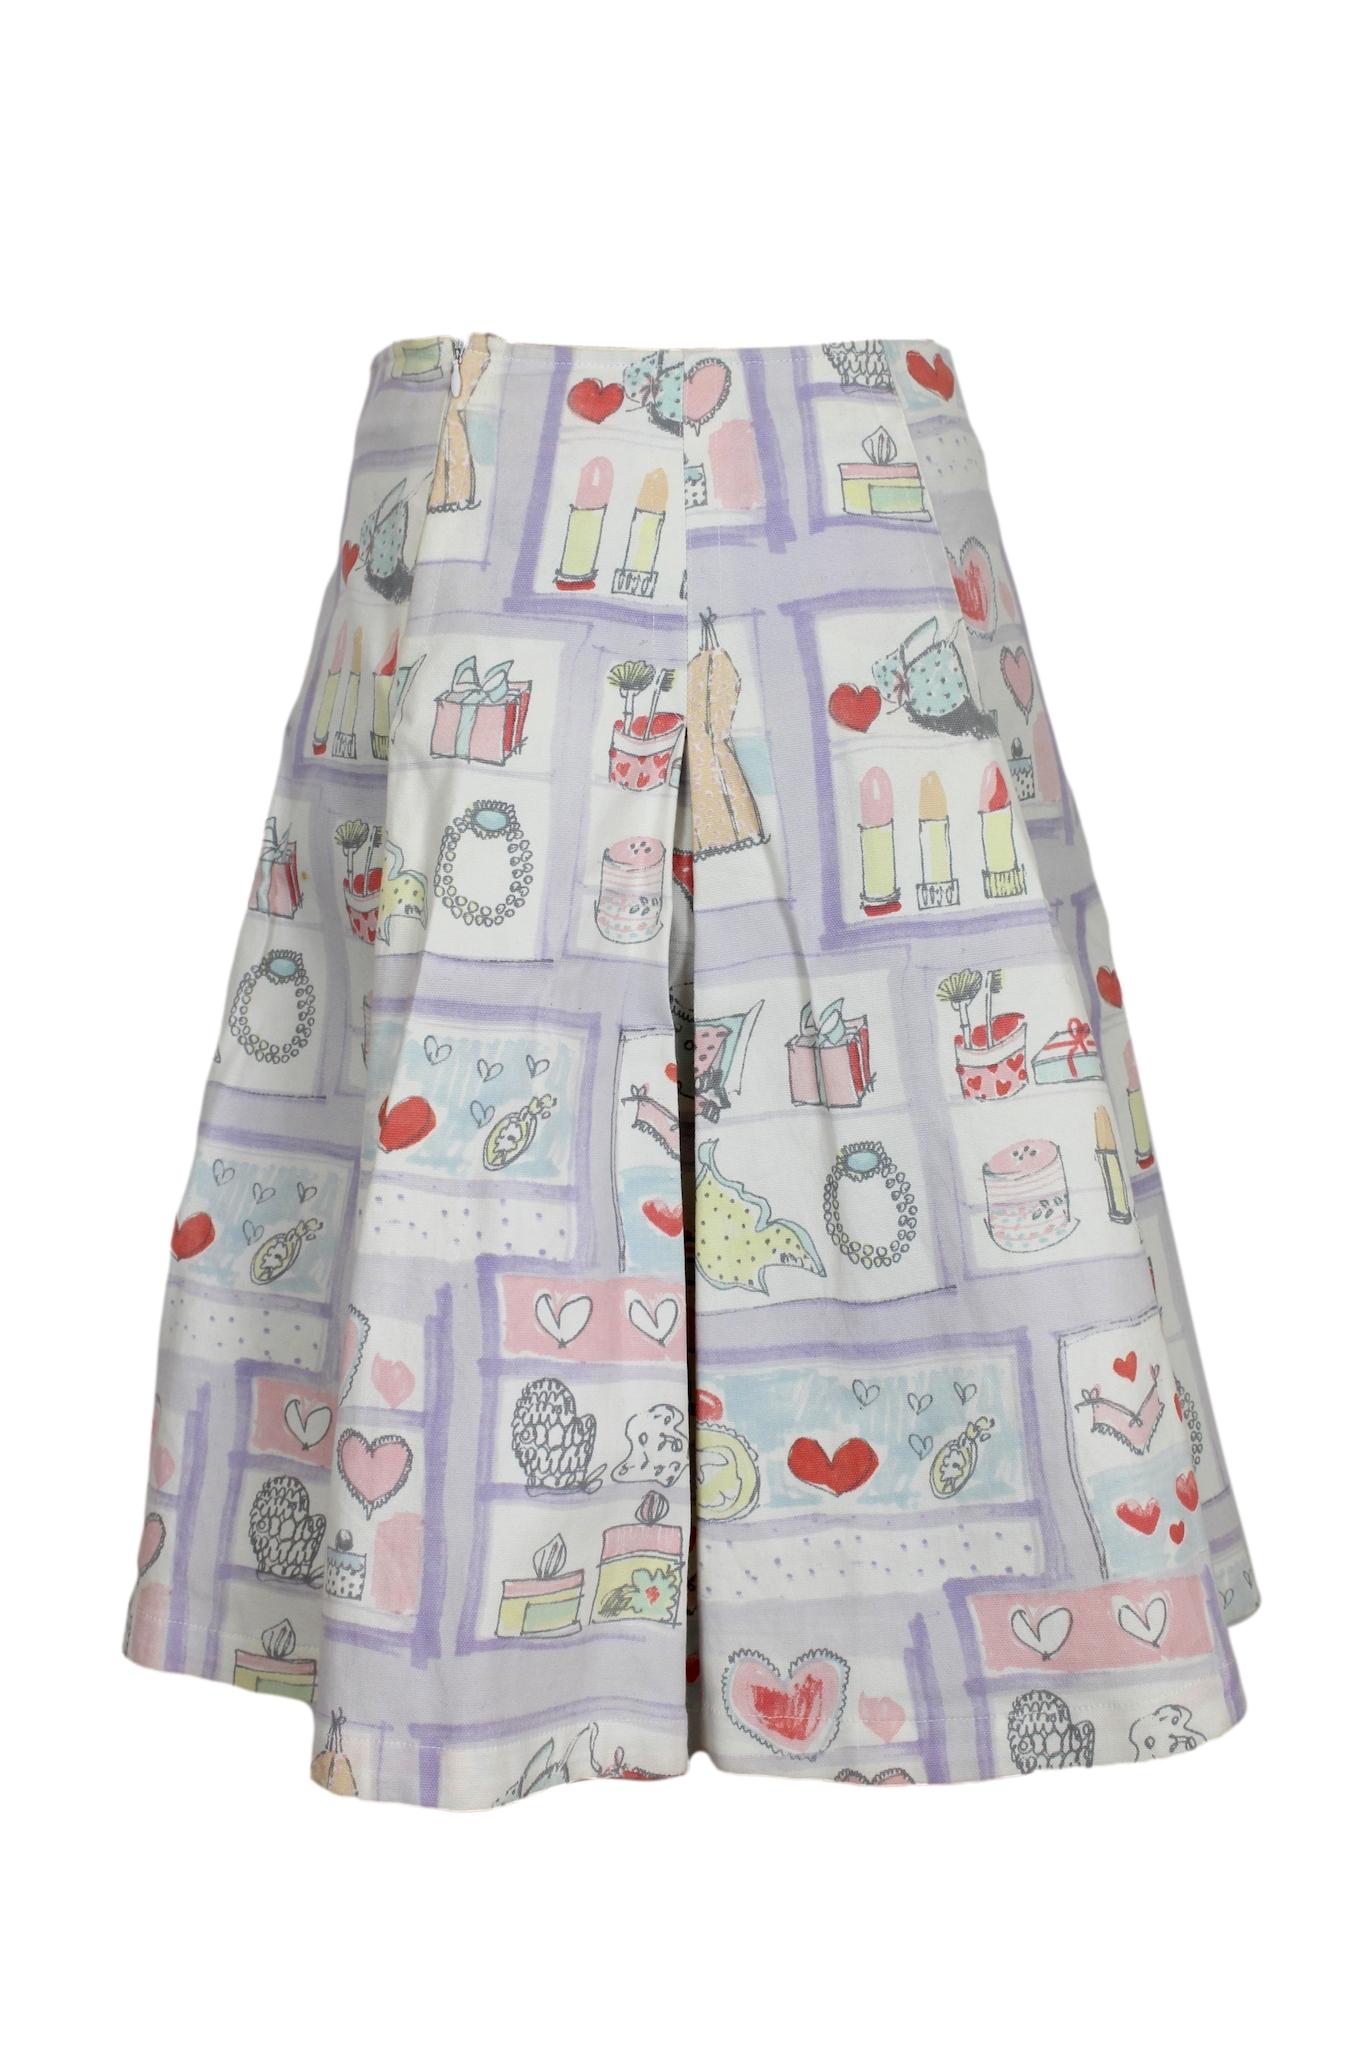 Max Mara 90s vintage pleated skirt. White color with pink abstract designs, knee length, 98% cotton, 2% elastane fabric. Zip closure. Made in Italy.

Size: 38 It 4 Us 6 Uk

Waist: 35 cm
Length: 60 cm